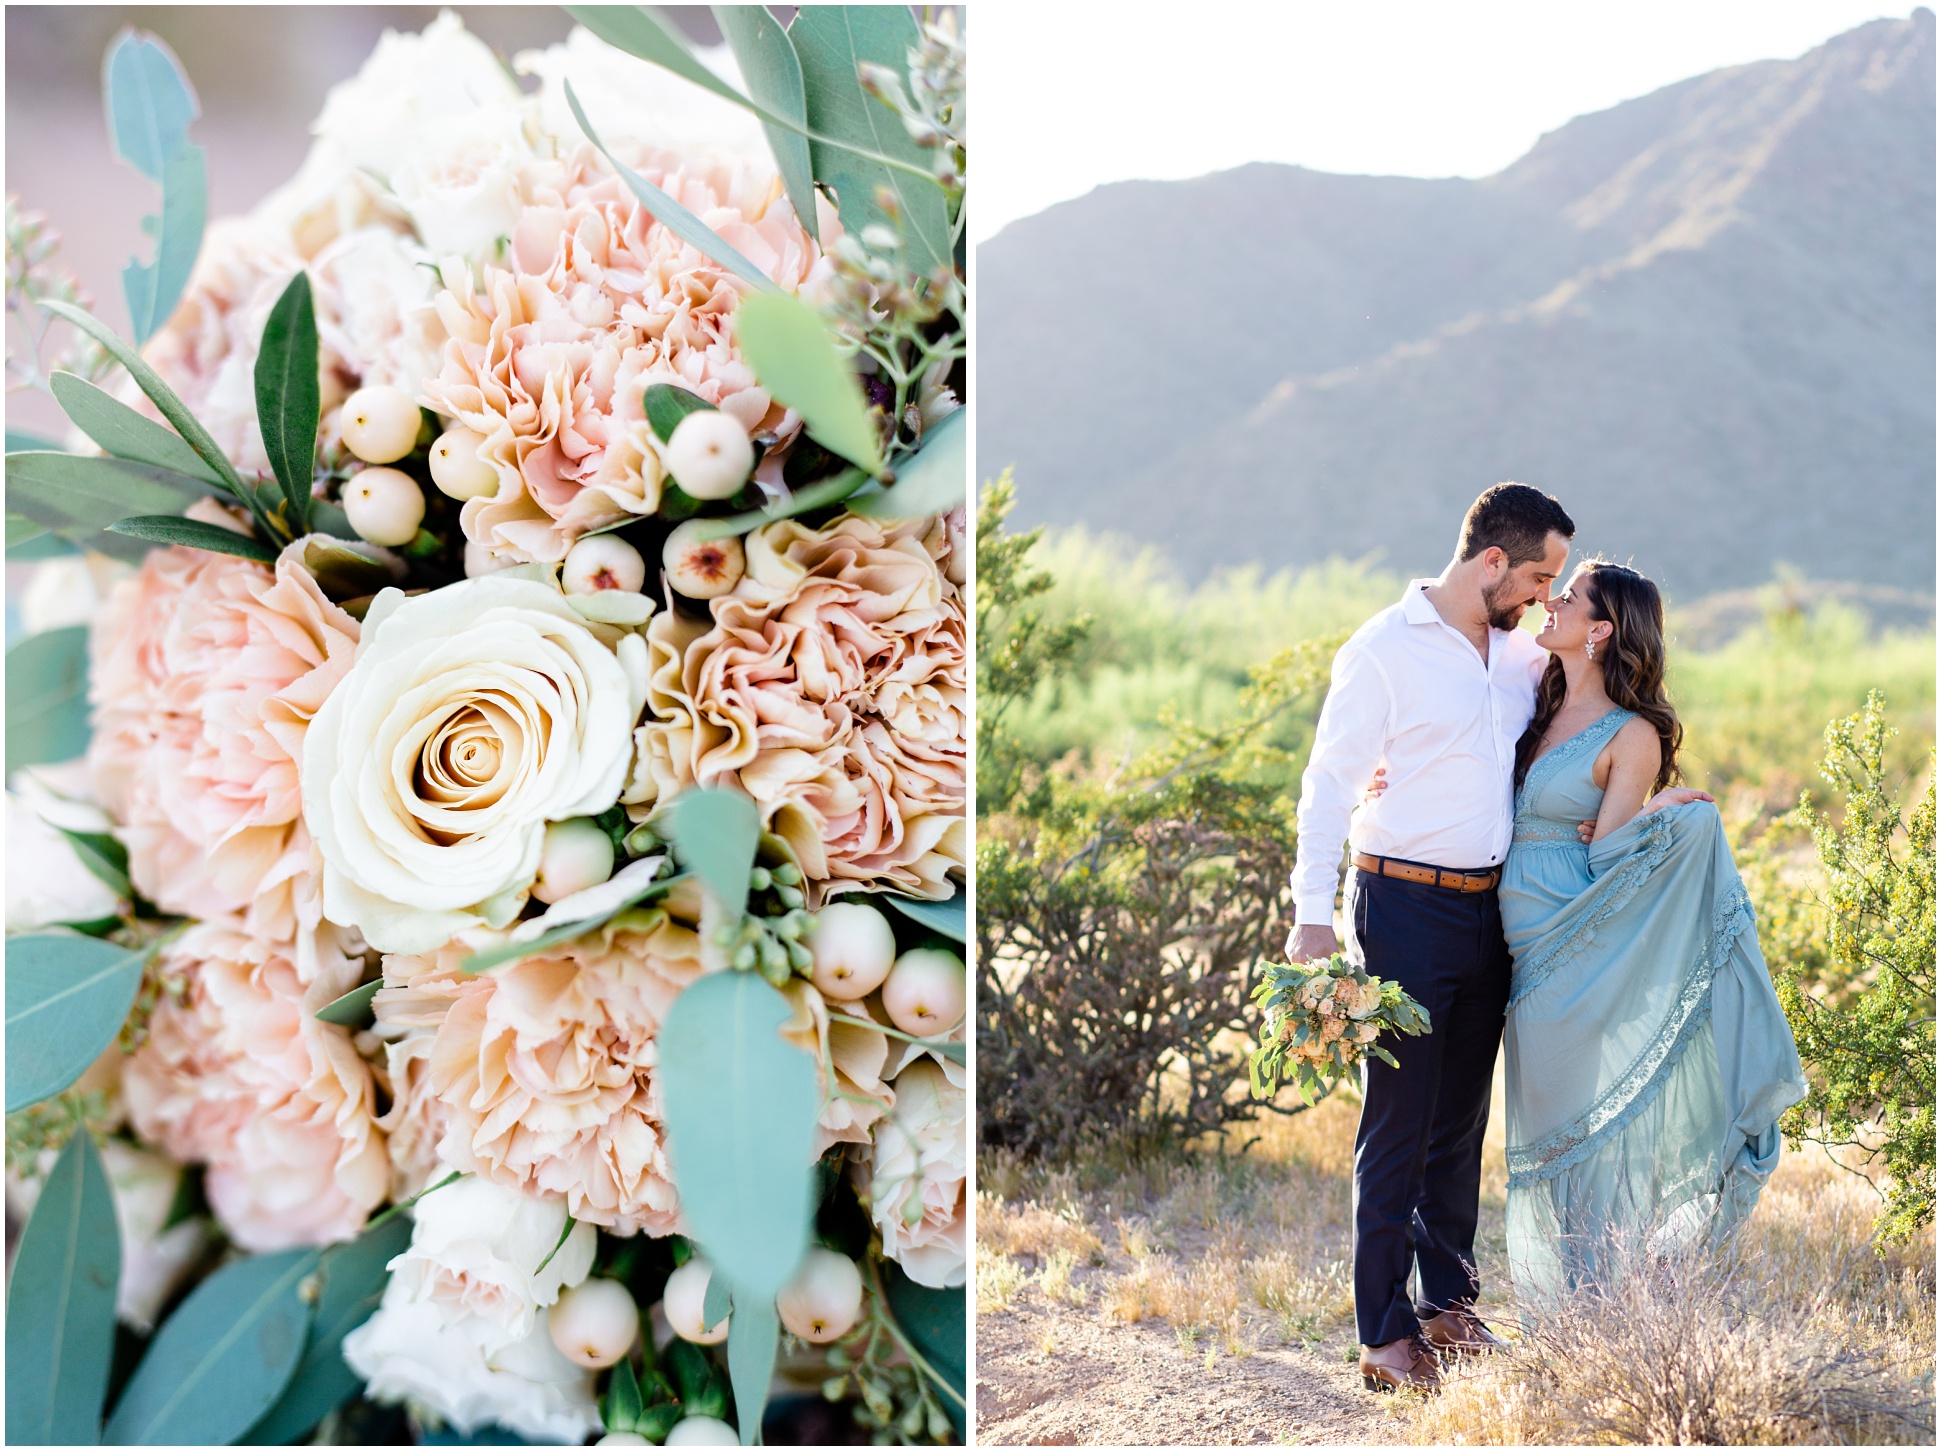 Blush Bouquet created by Butterfly Petals on the left, and Anette and Paul De La Rosa snuggled up in the desert as Paul holds the bouquet